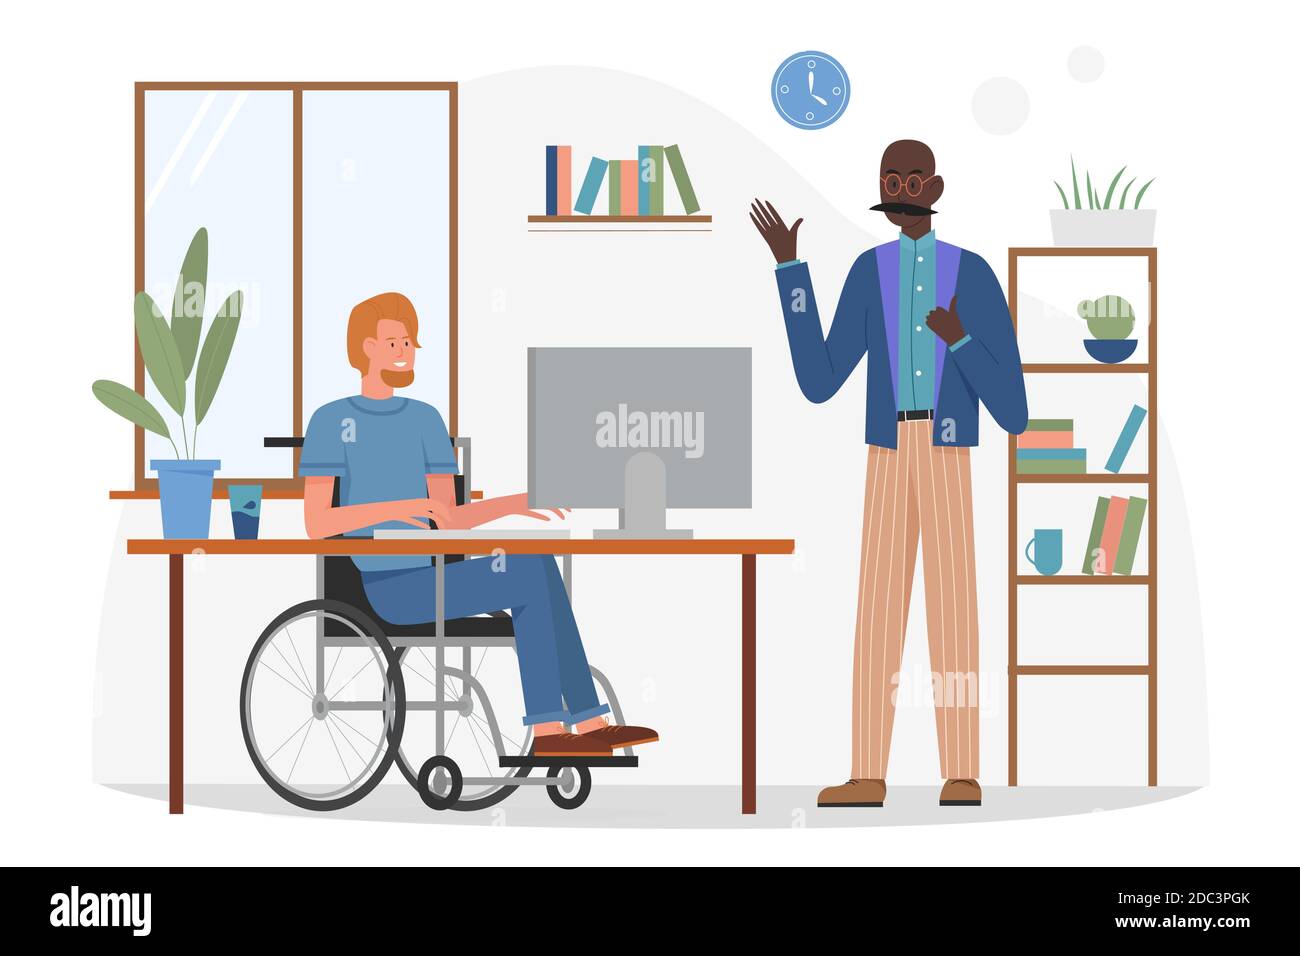 Disabled character working in business office vector illustration. Cartoon handicapped worker sitting in wheelchair behind computer and talking with man colleague in workplace room interior background Stock Vector